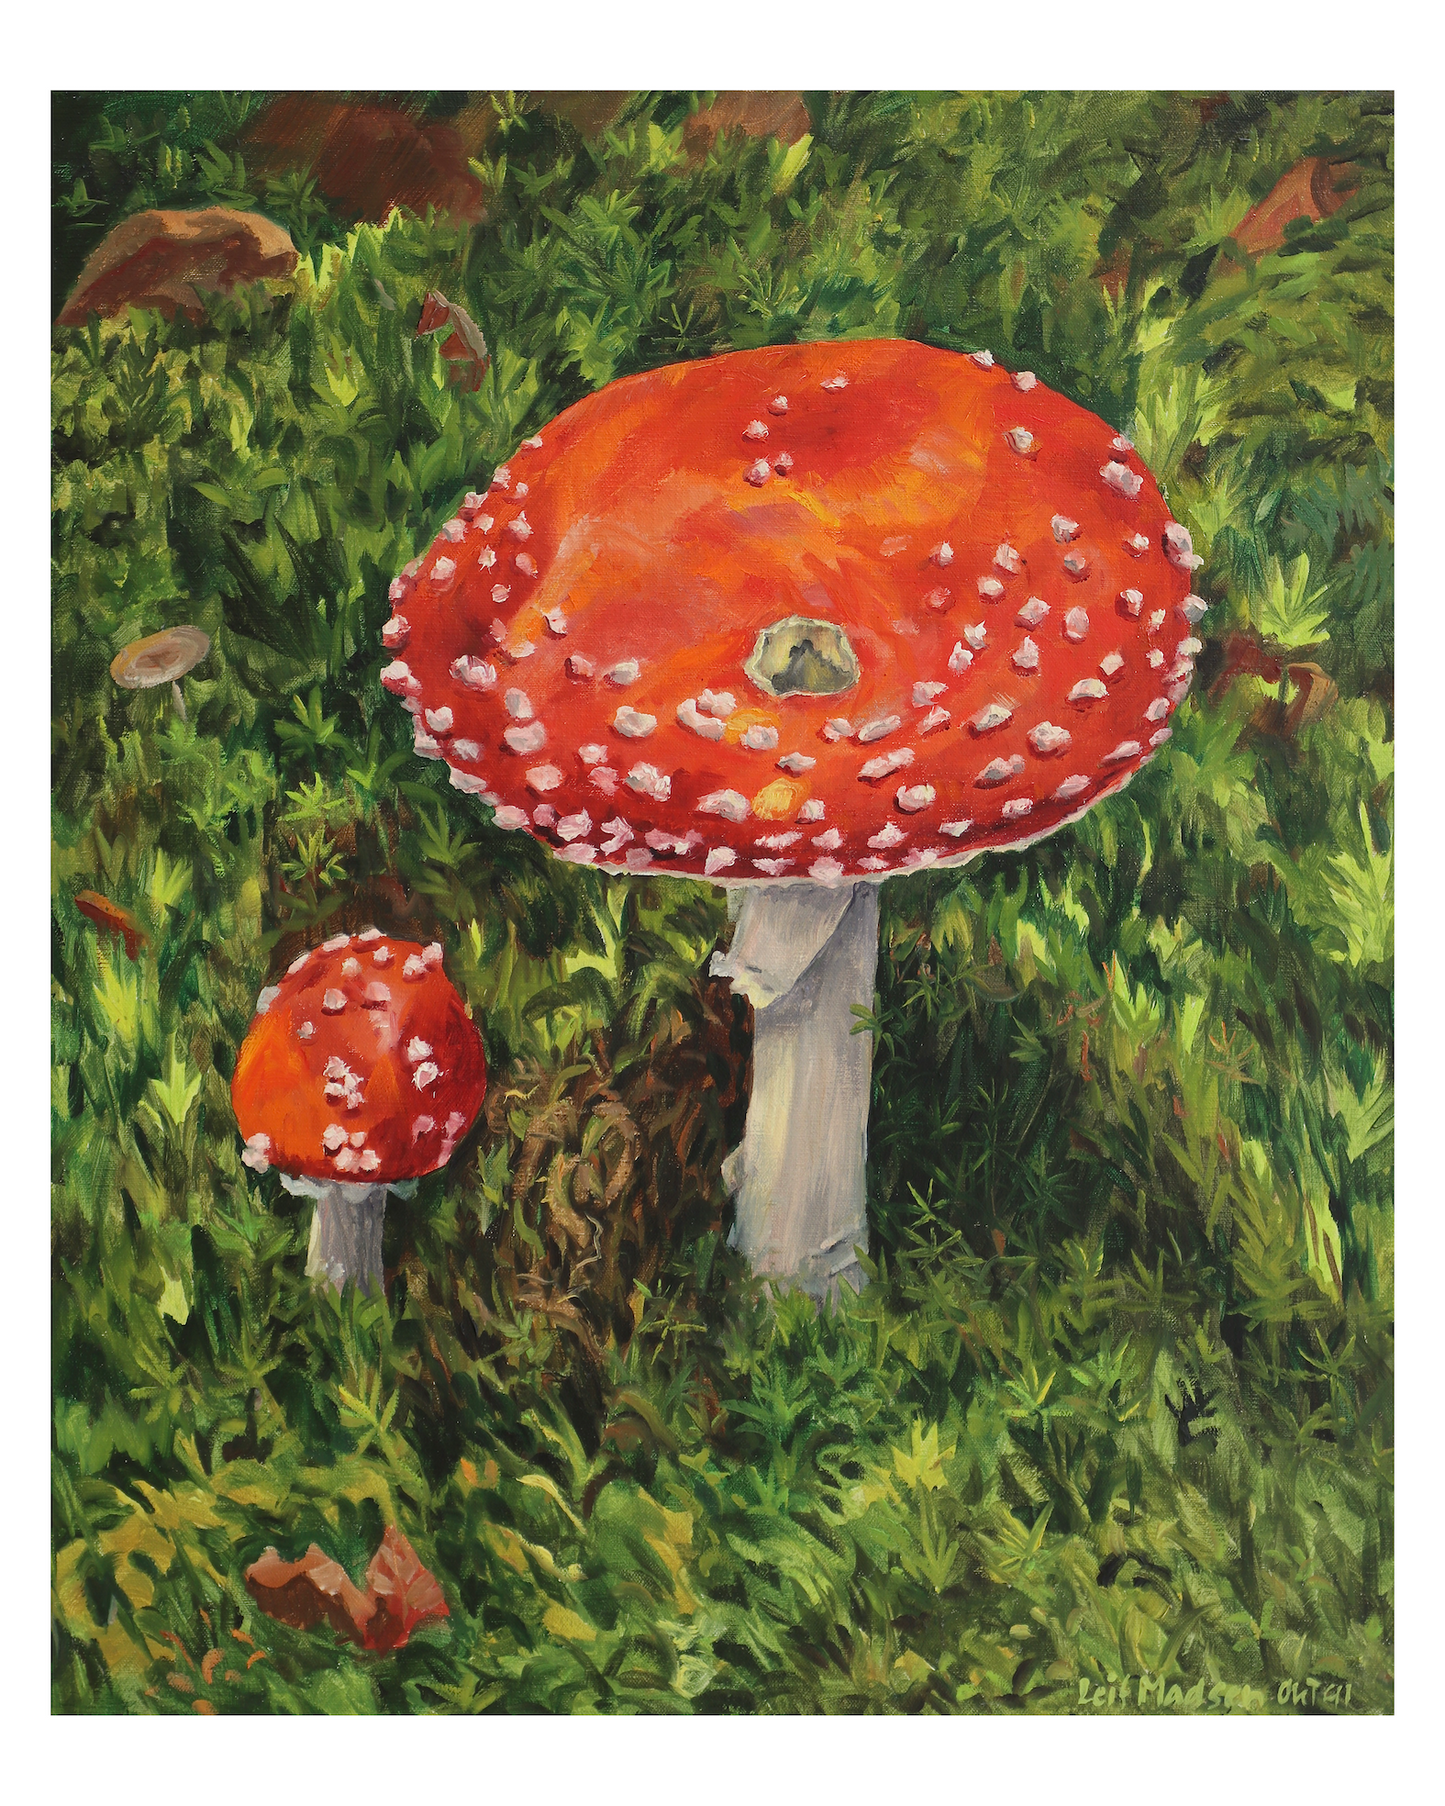 Red fly agaric